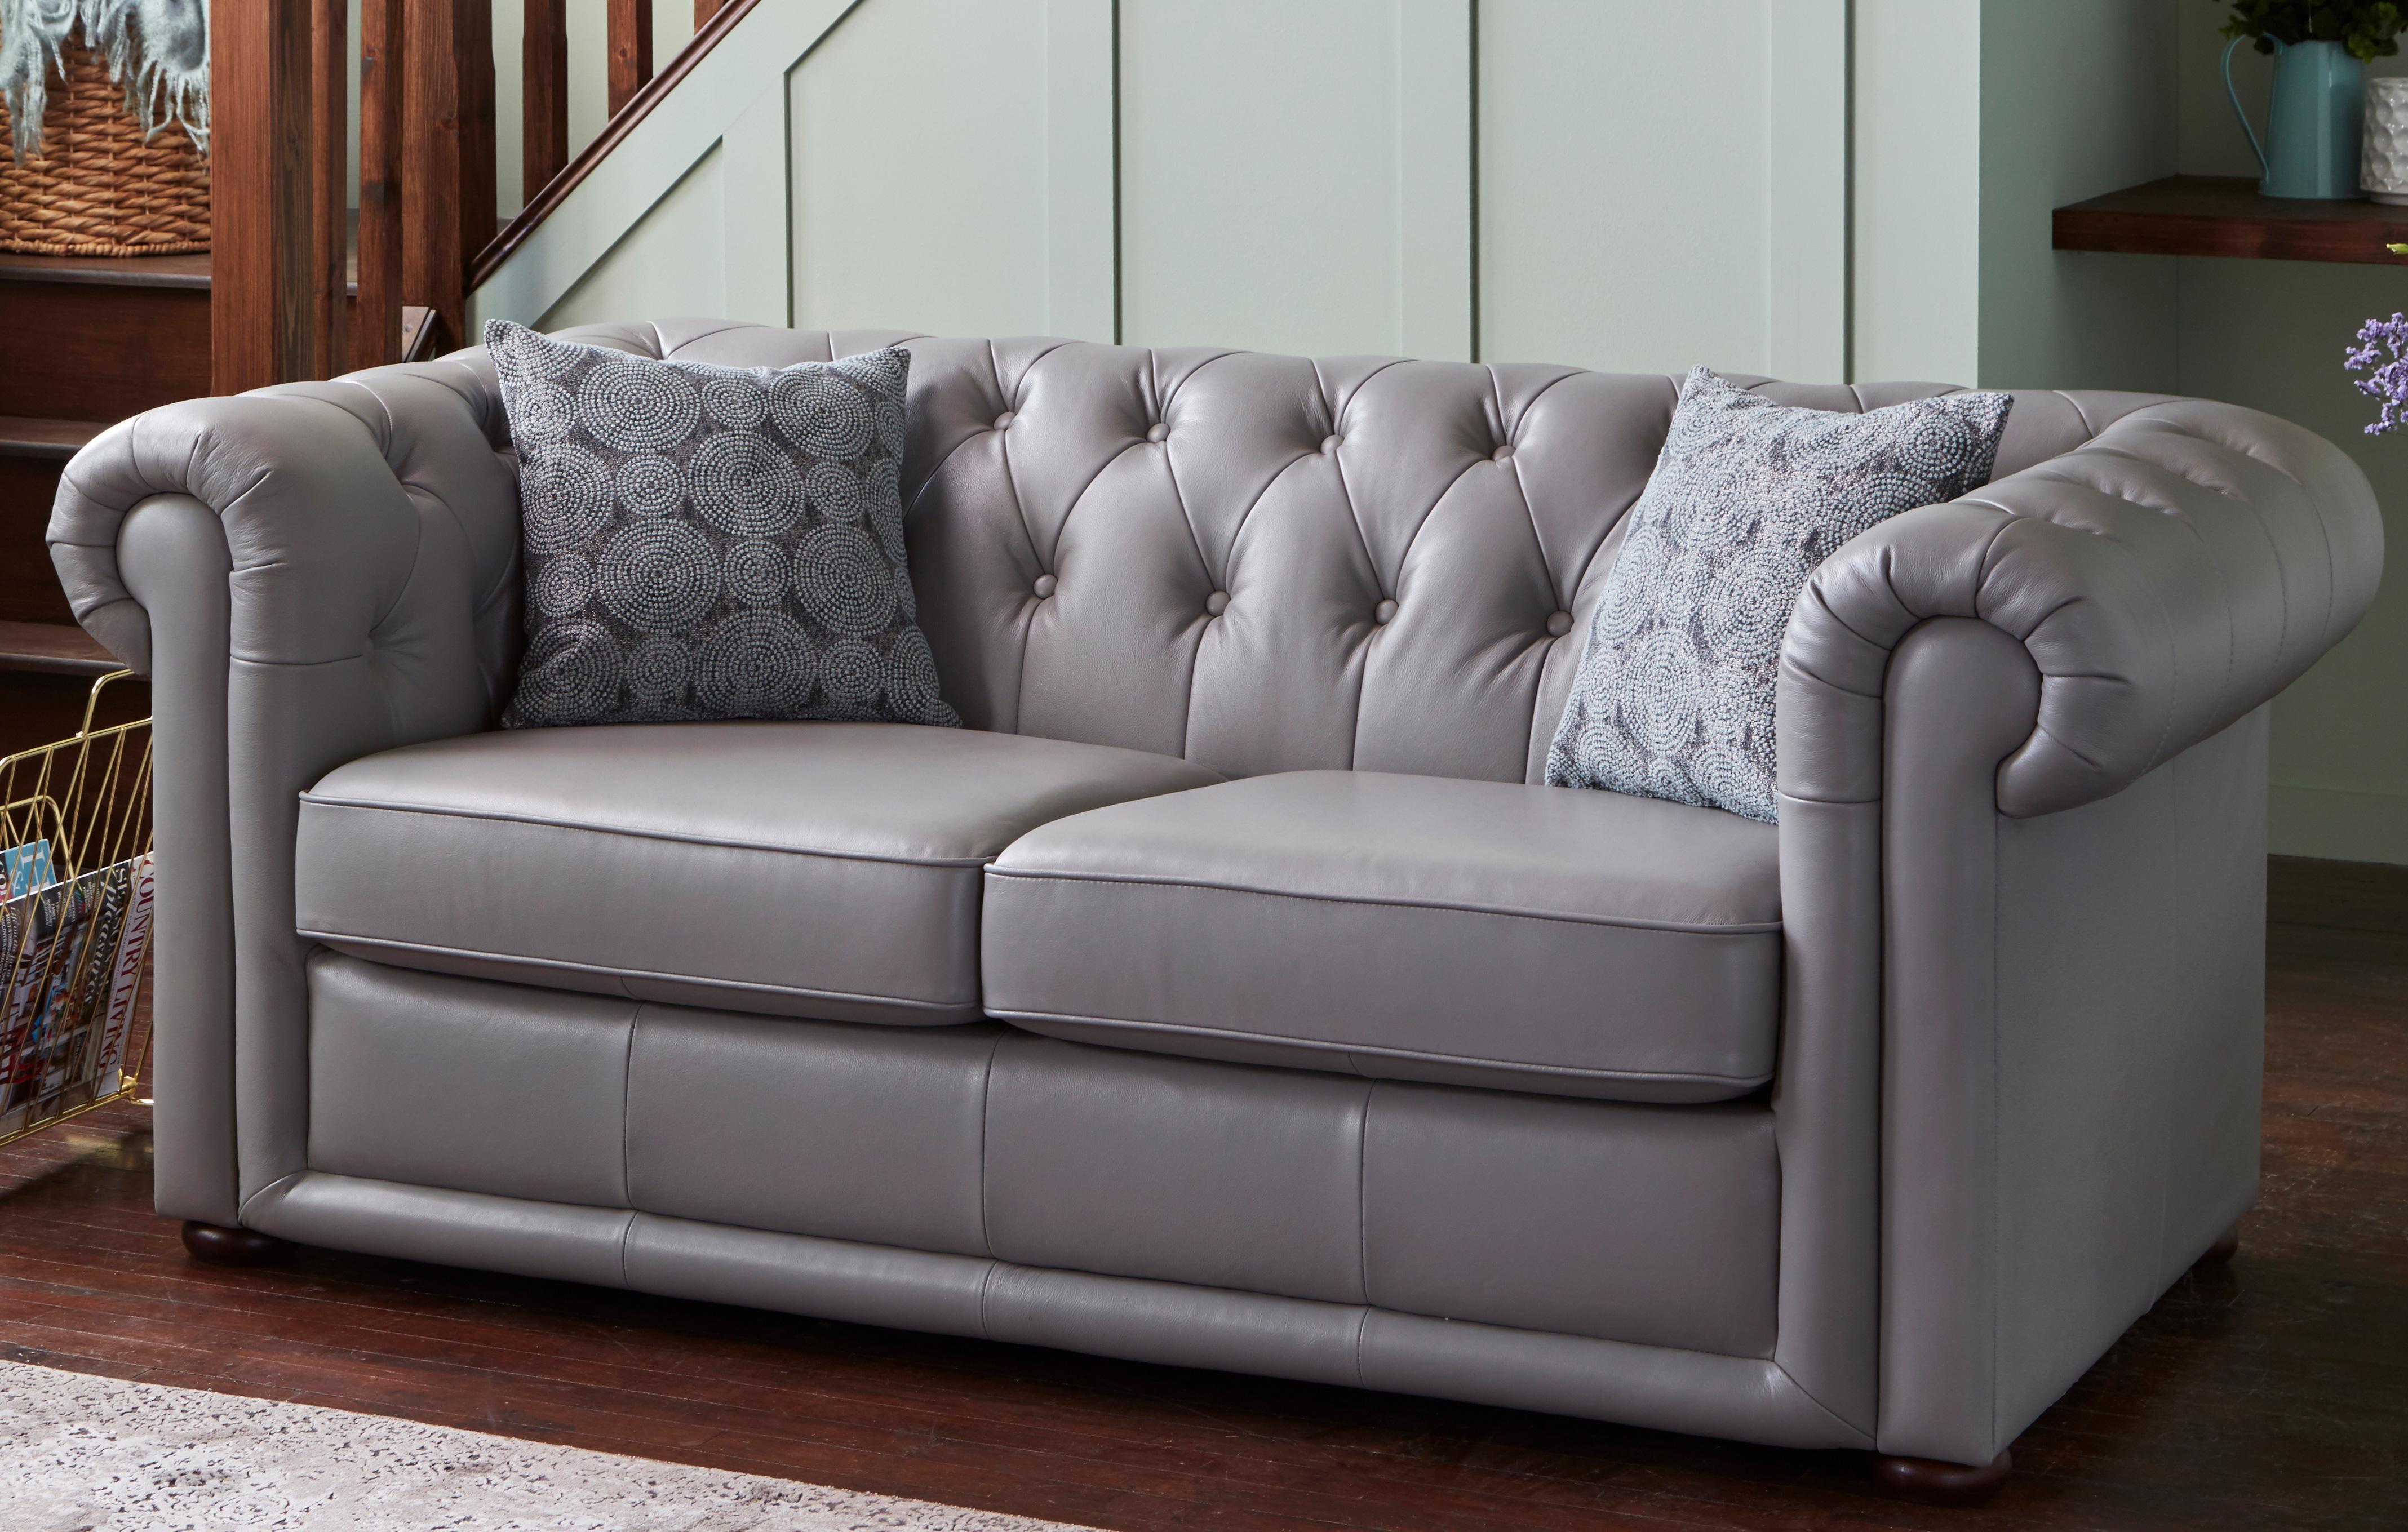 dfs double sofa bed